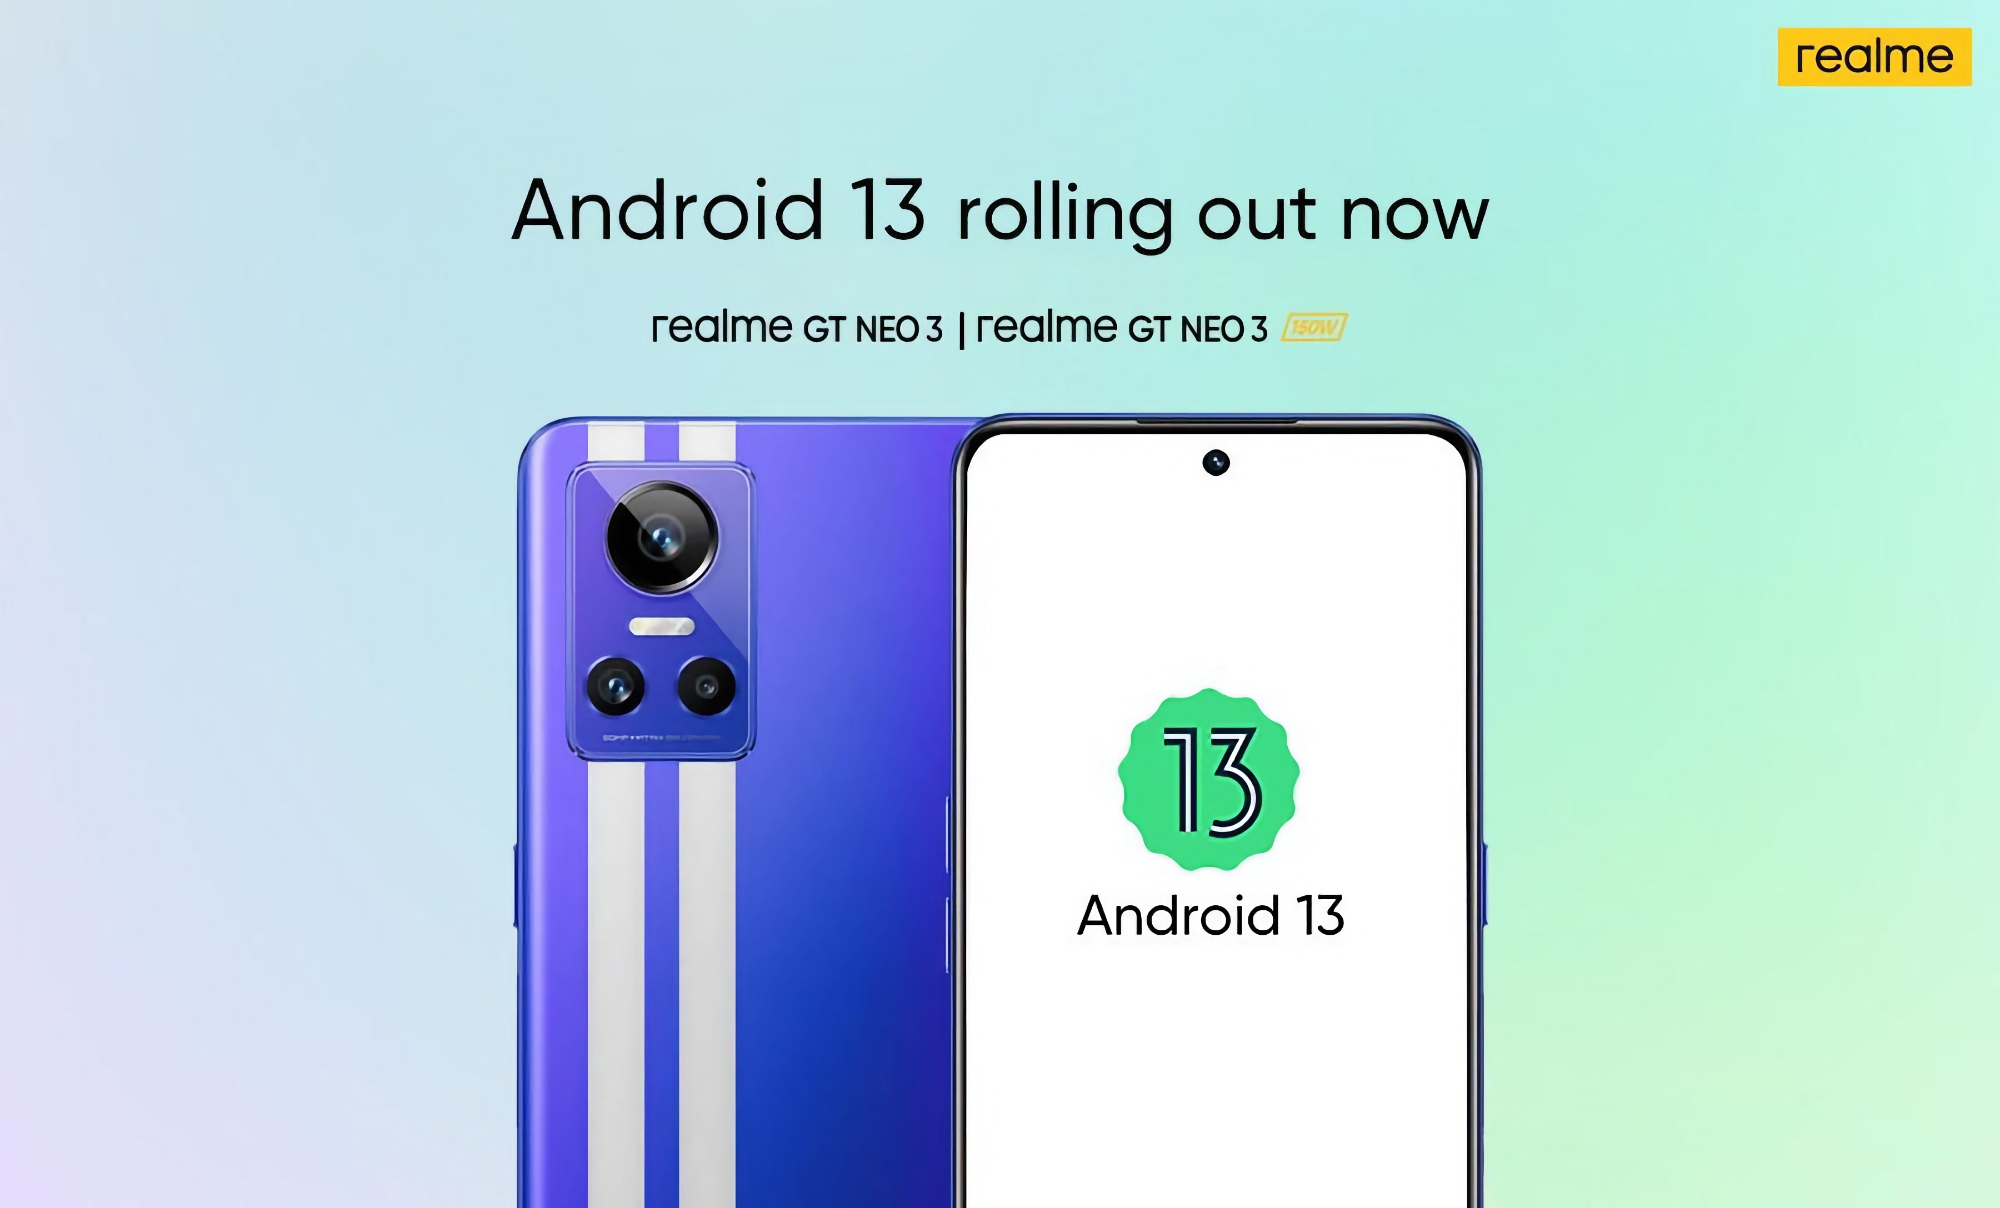 realme GT Neo 3 received a stable version of realme UI 3.0 based on Android 13